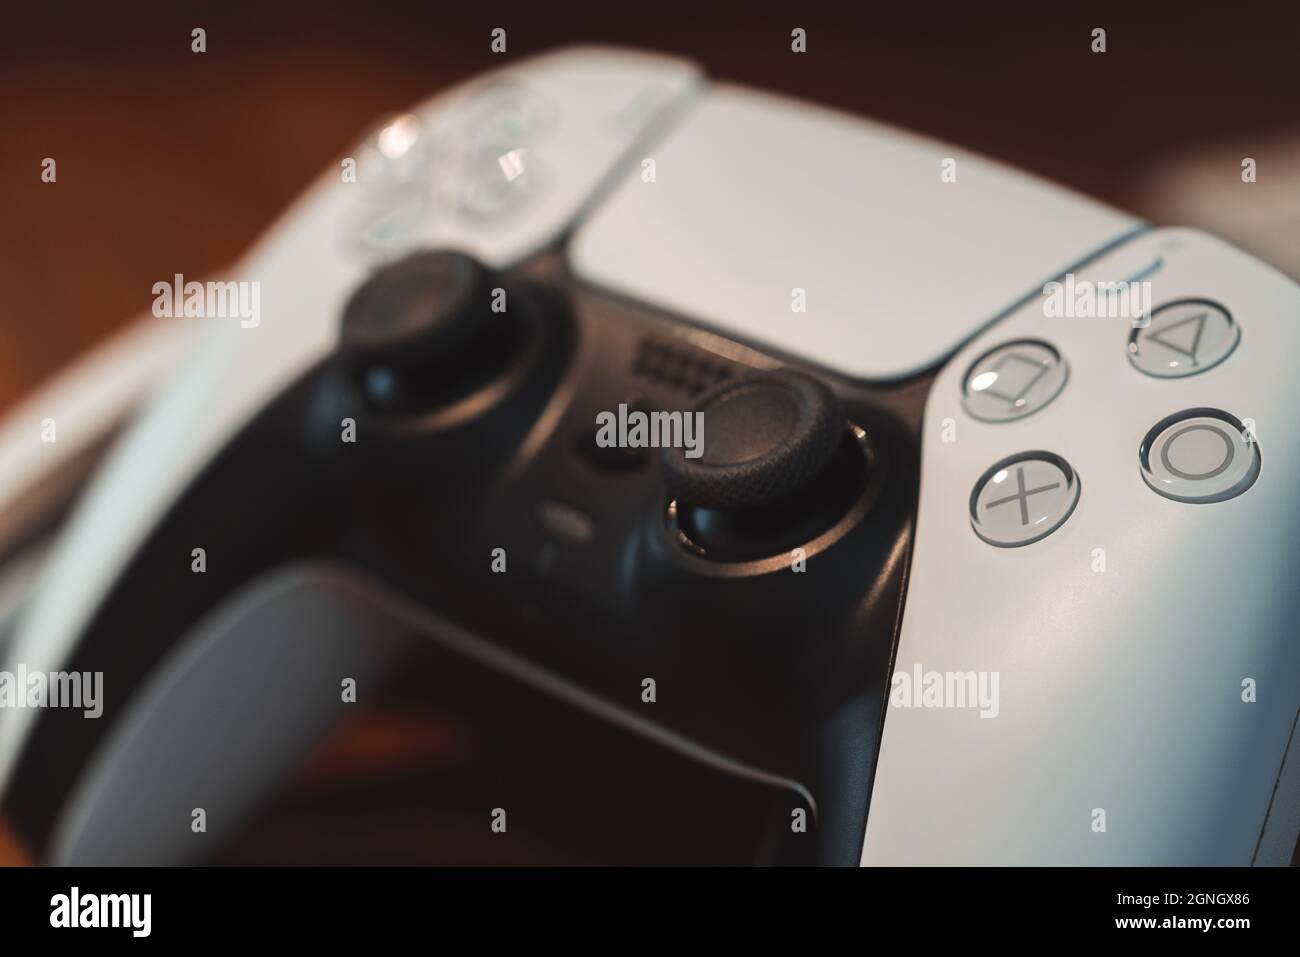 London, UK - May 25, 2021: Close up of white Playstation 5 (PS5) DualSense wireless controller. Playstation 5 is the latest video game console from So Stock Photo